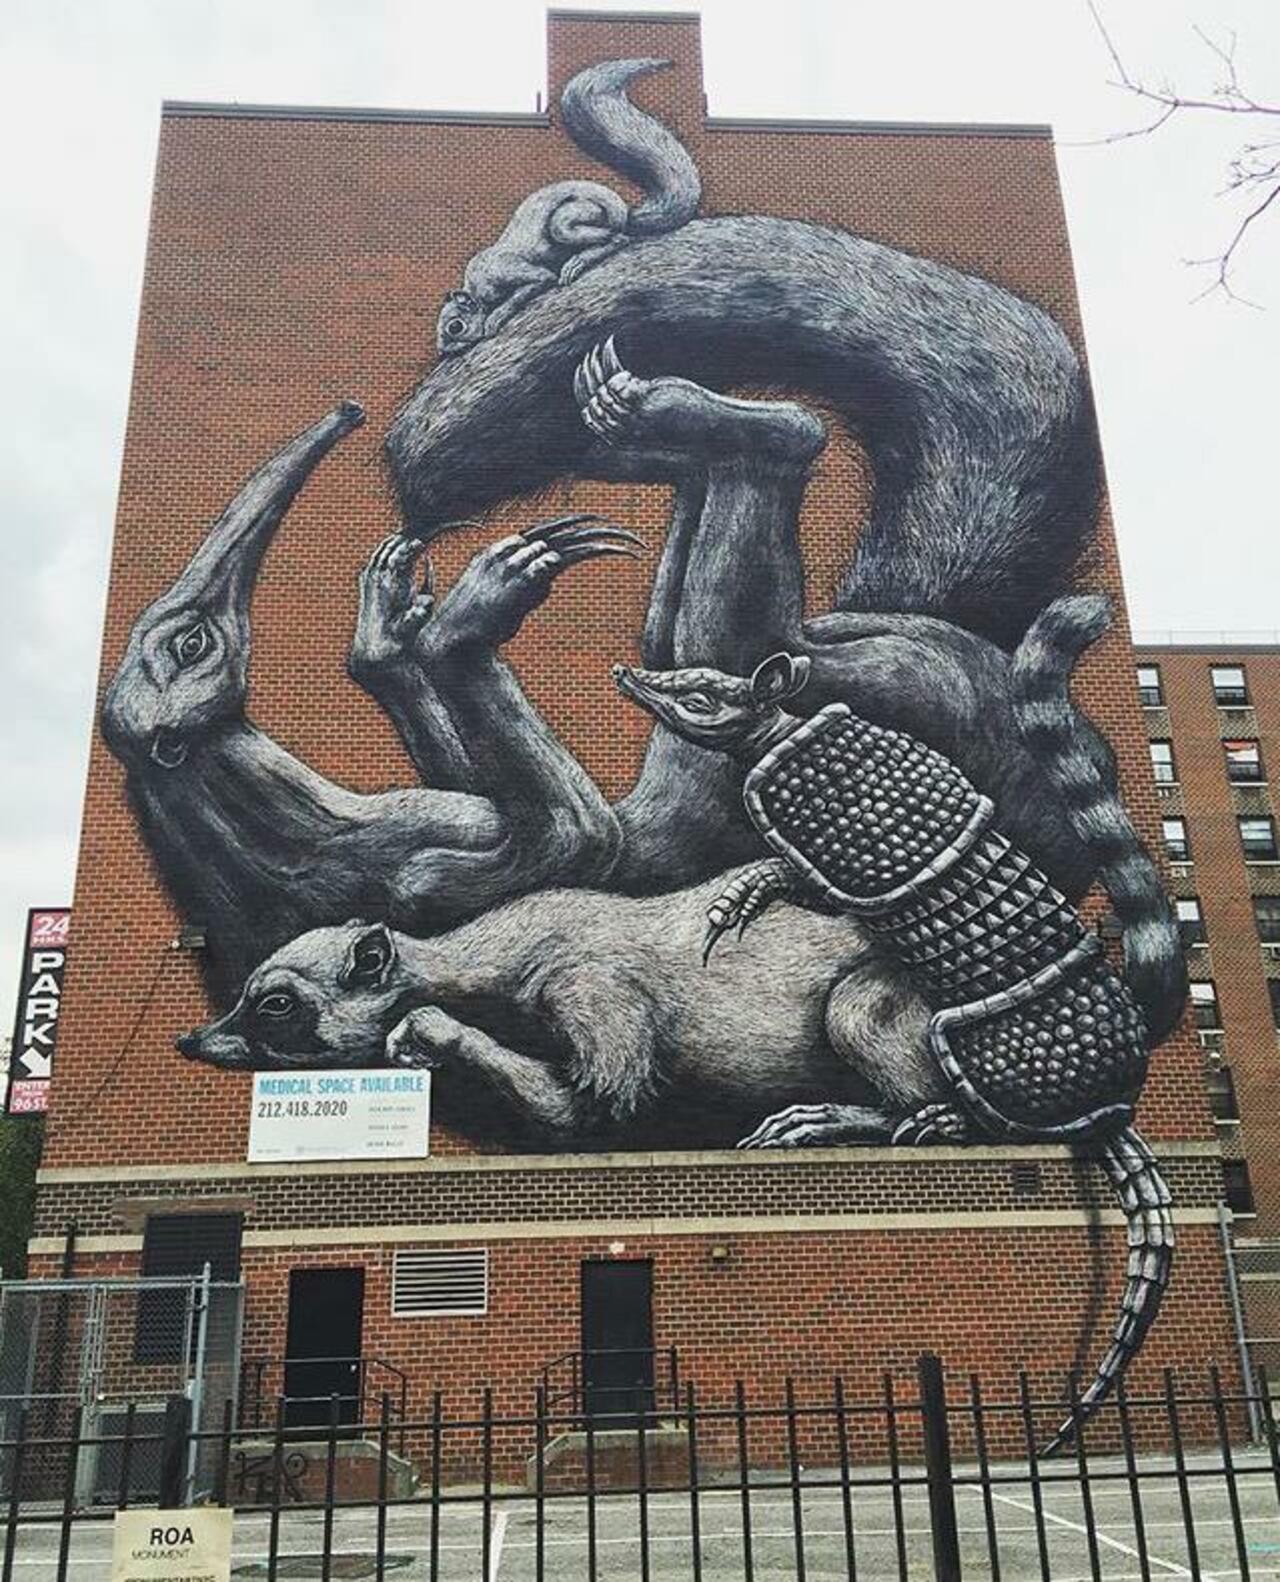 The completed new large scale Street Art wall by ROA in NYC

#art #graffiti #mural #streetart http://t.co/nT4N054I7J